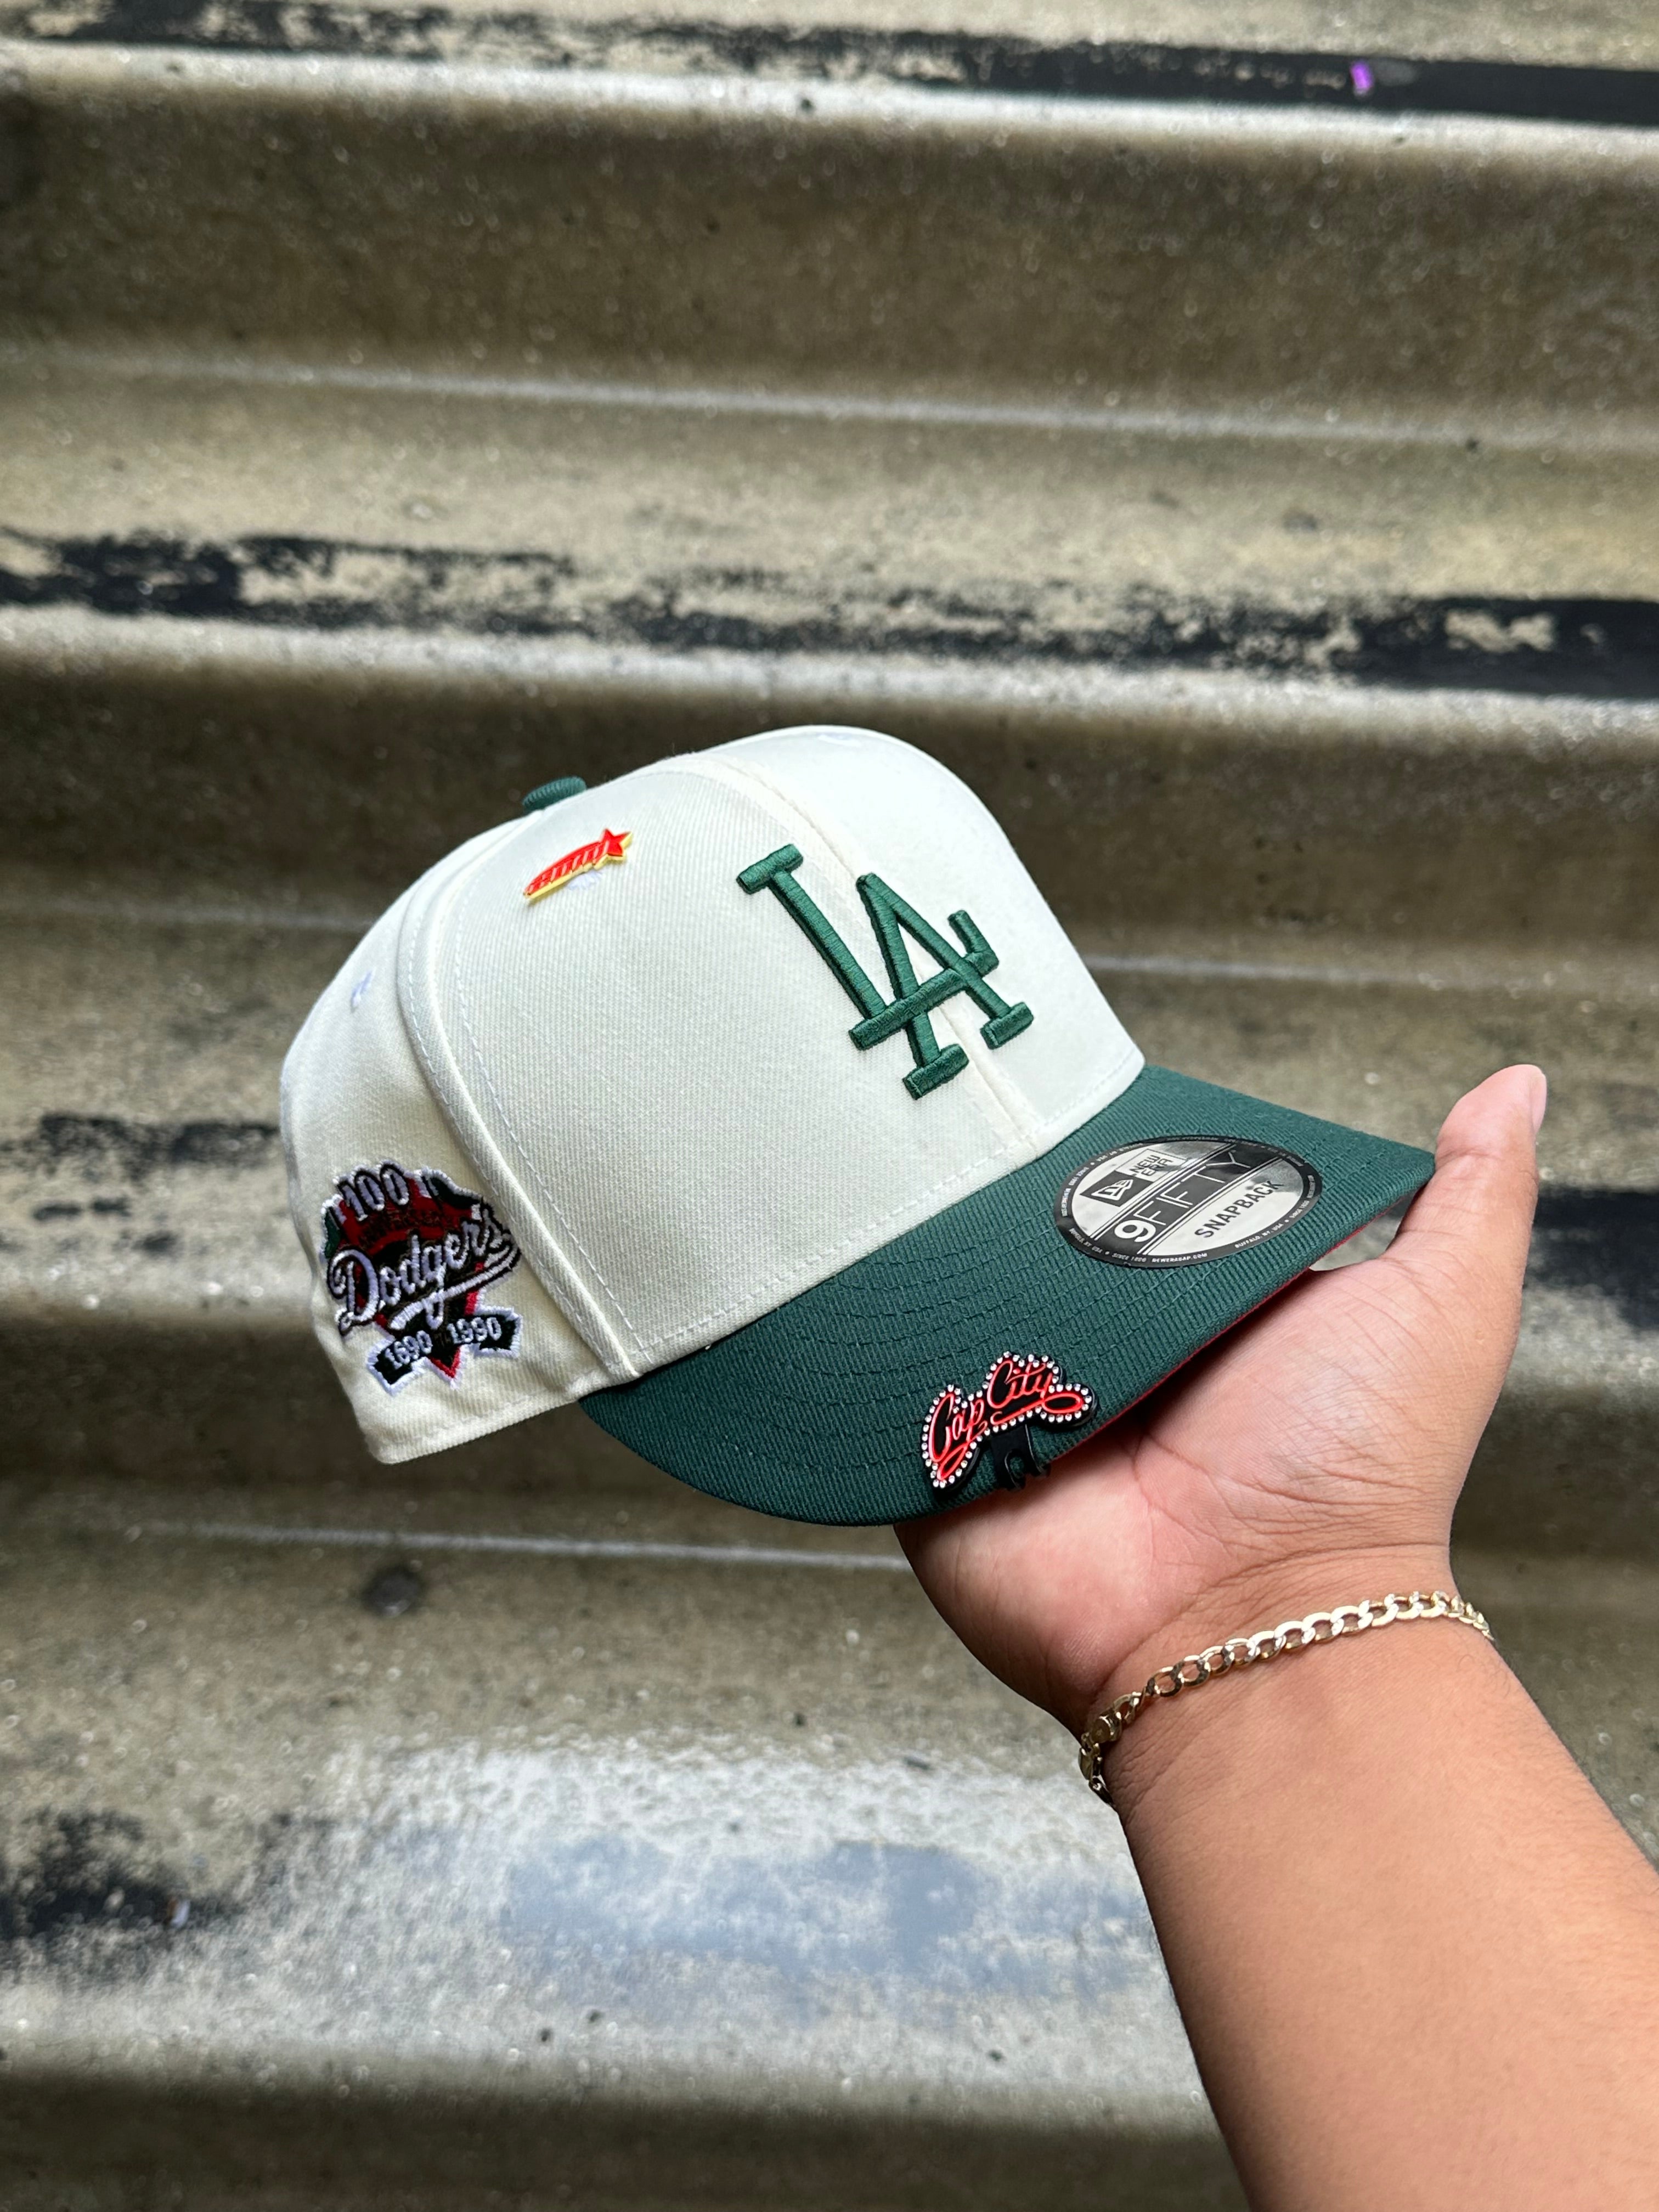 NEW ERA EXCLUSIVE 9FIFTY CHROME WHITE/GREEN LOS ANGELES DODGERS SNAPBACK W/ 100TH ANNIVERSARY PATCH